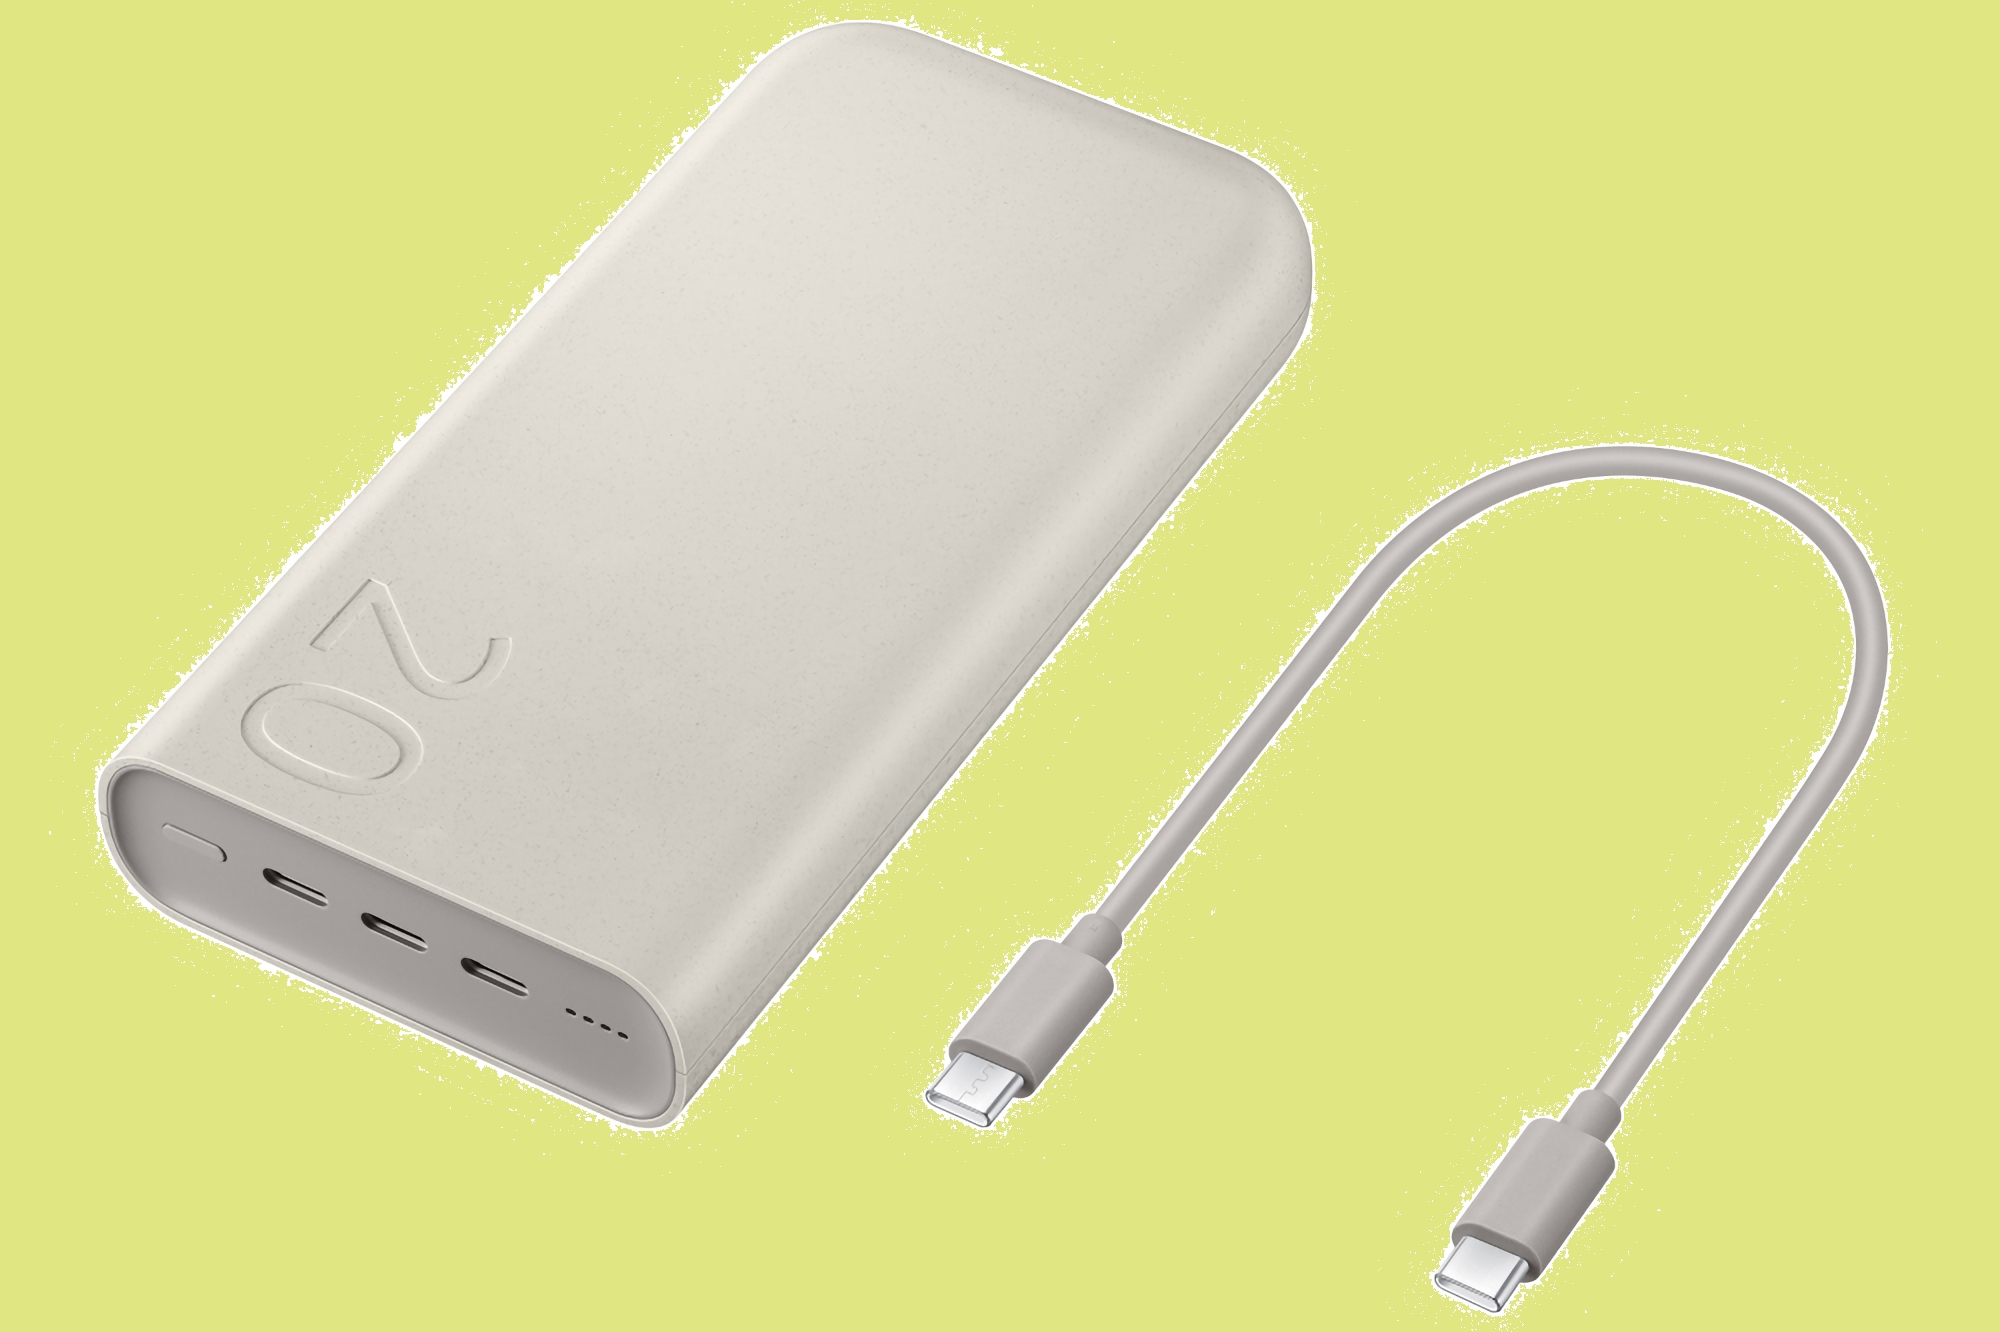 Samsung announced two powerbanks with USB-C ports, up to 45W charging and up to 20,000mAh capacity